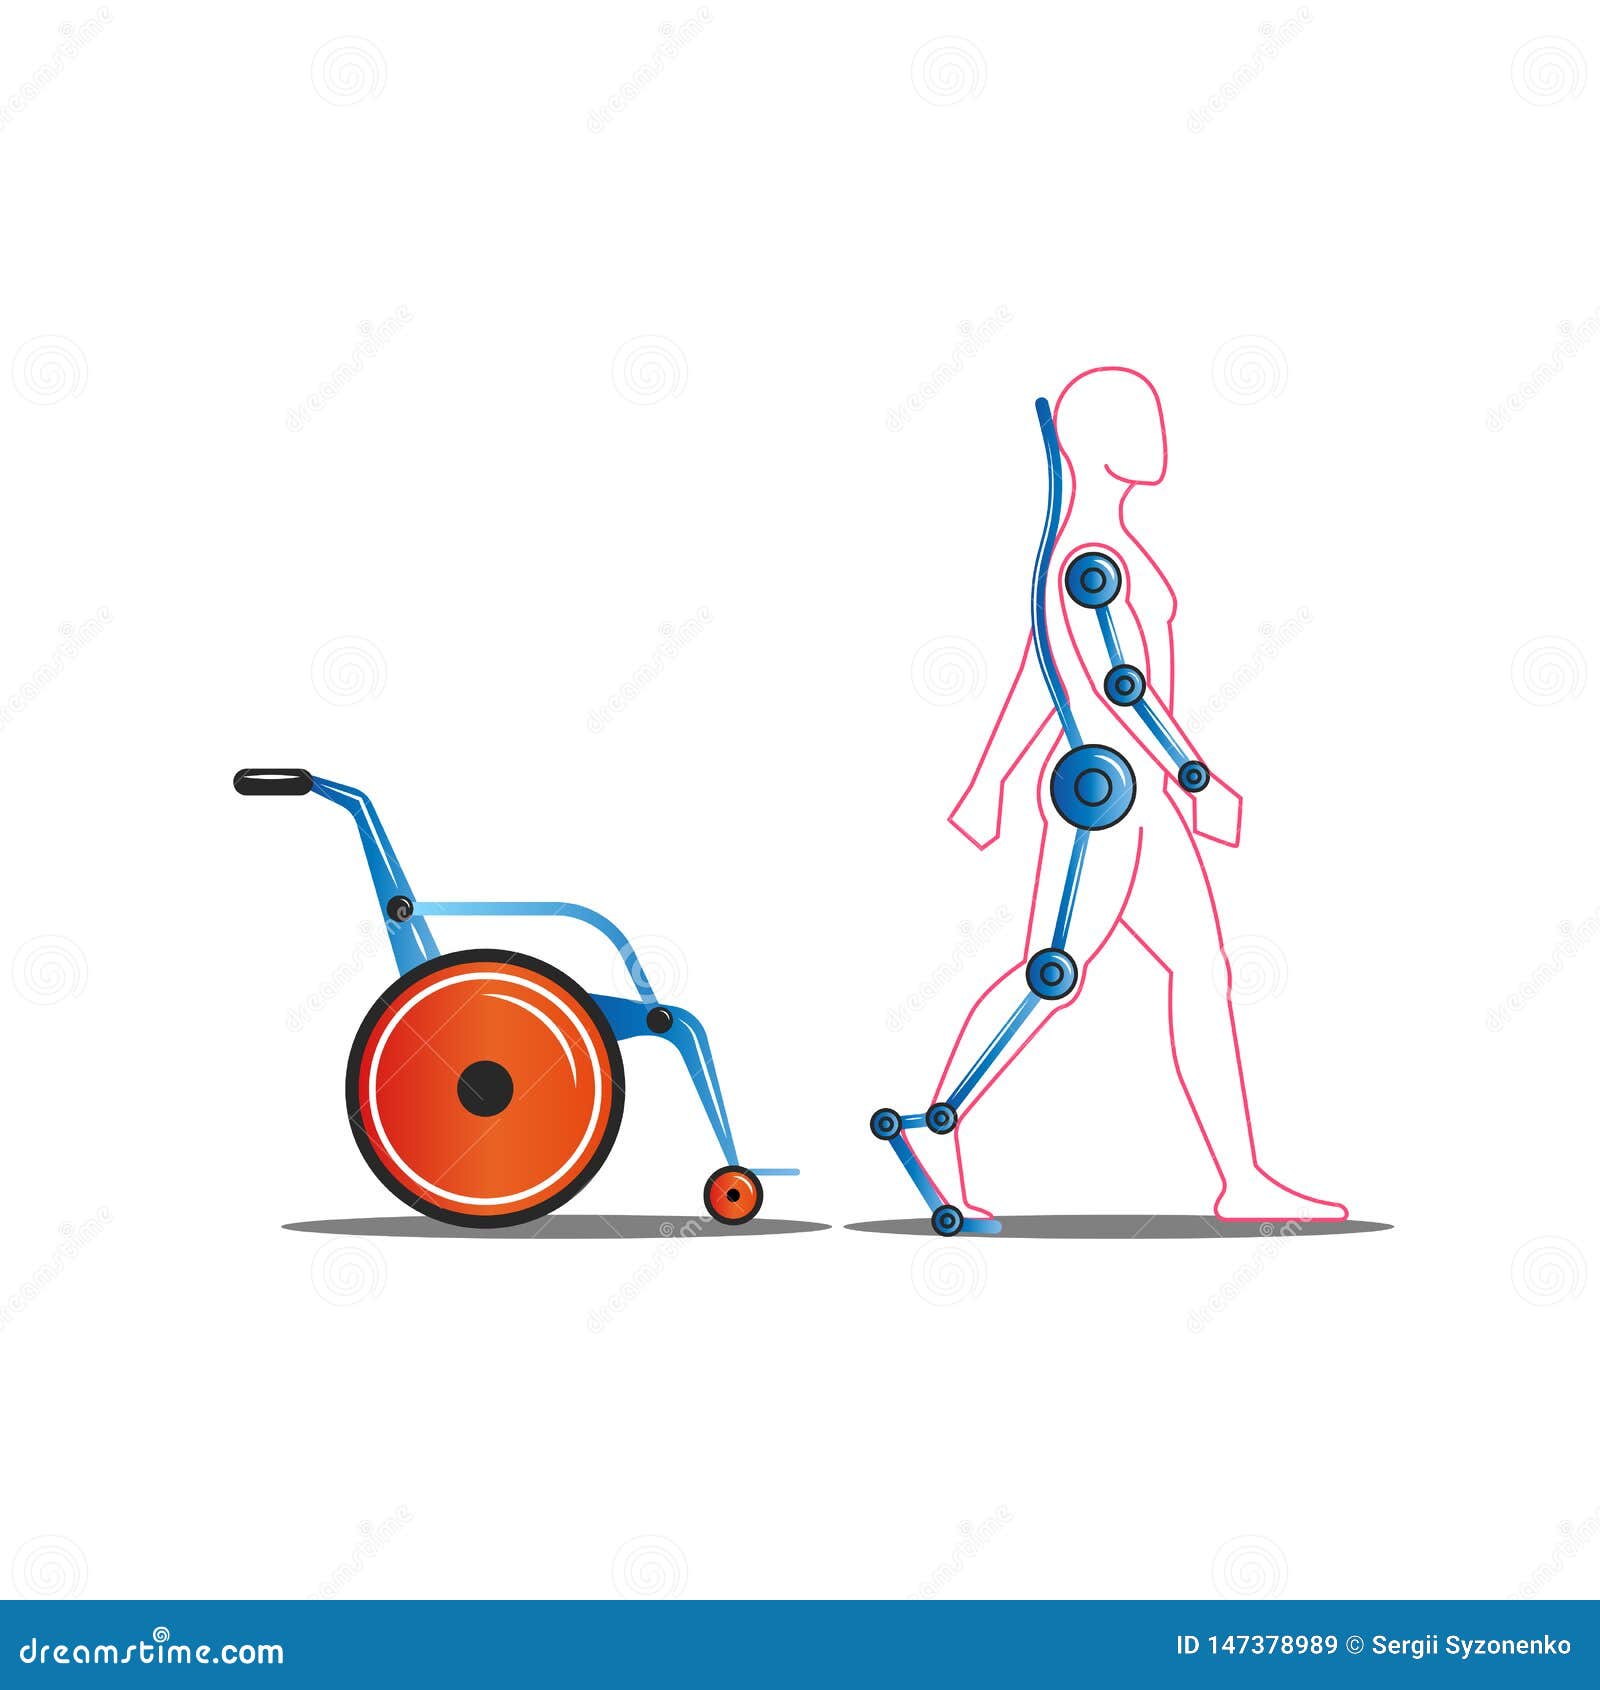 disabled person getting out of a wheelchair using an exoskeleton concept  , medical servo technology for people